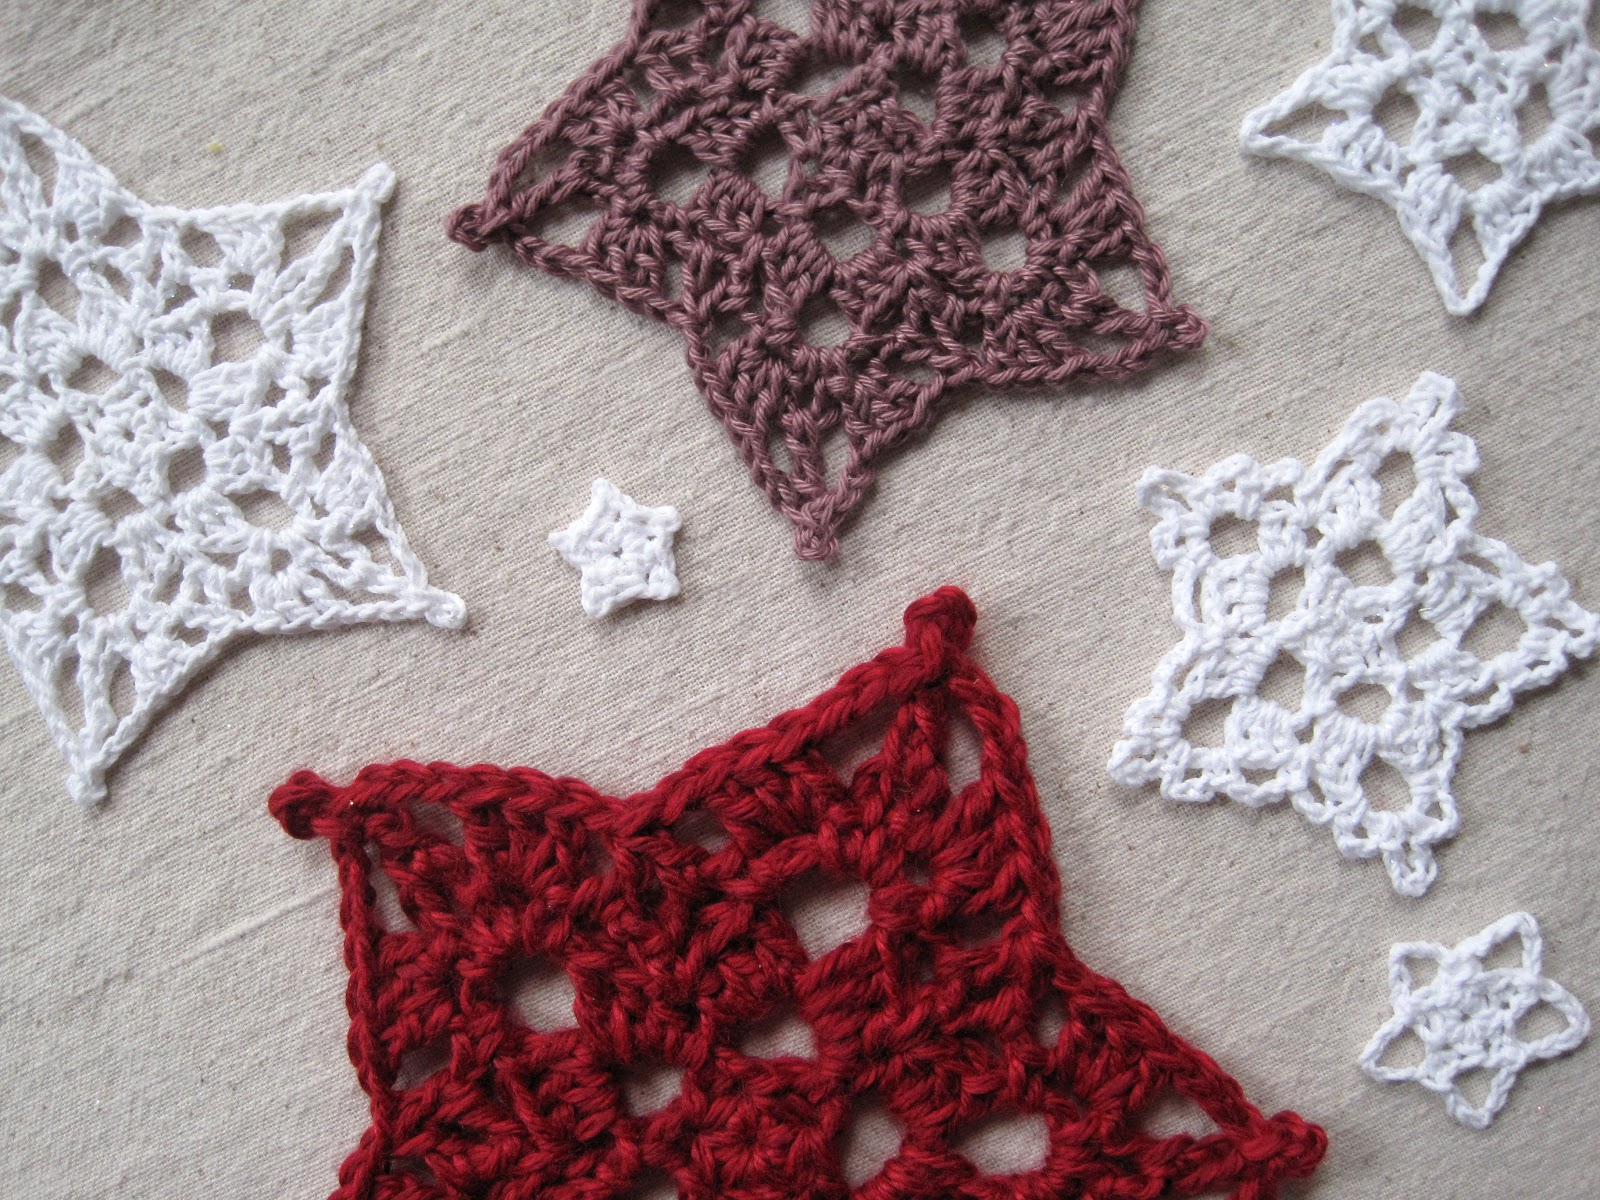 Star Crochet Pattern Mr Micawbers Recipe For Happiness Five Star Motif A Free